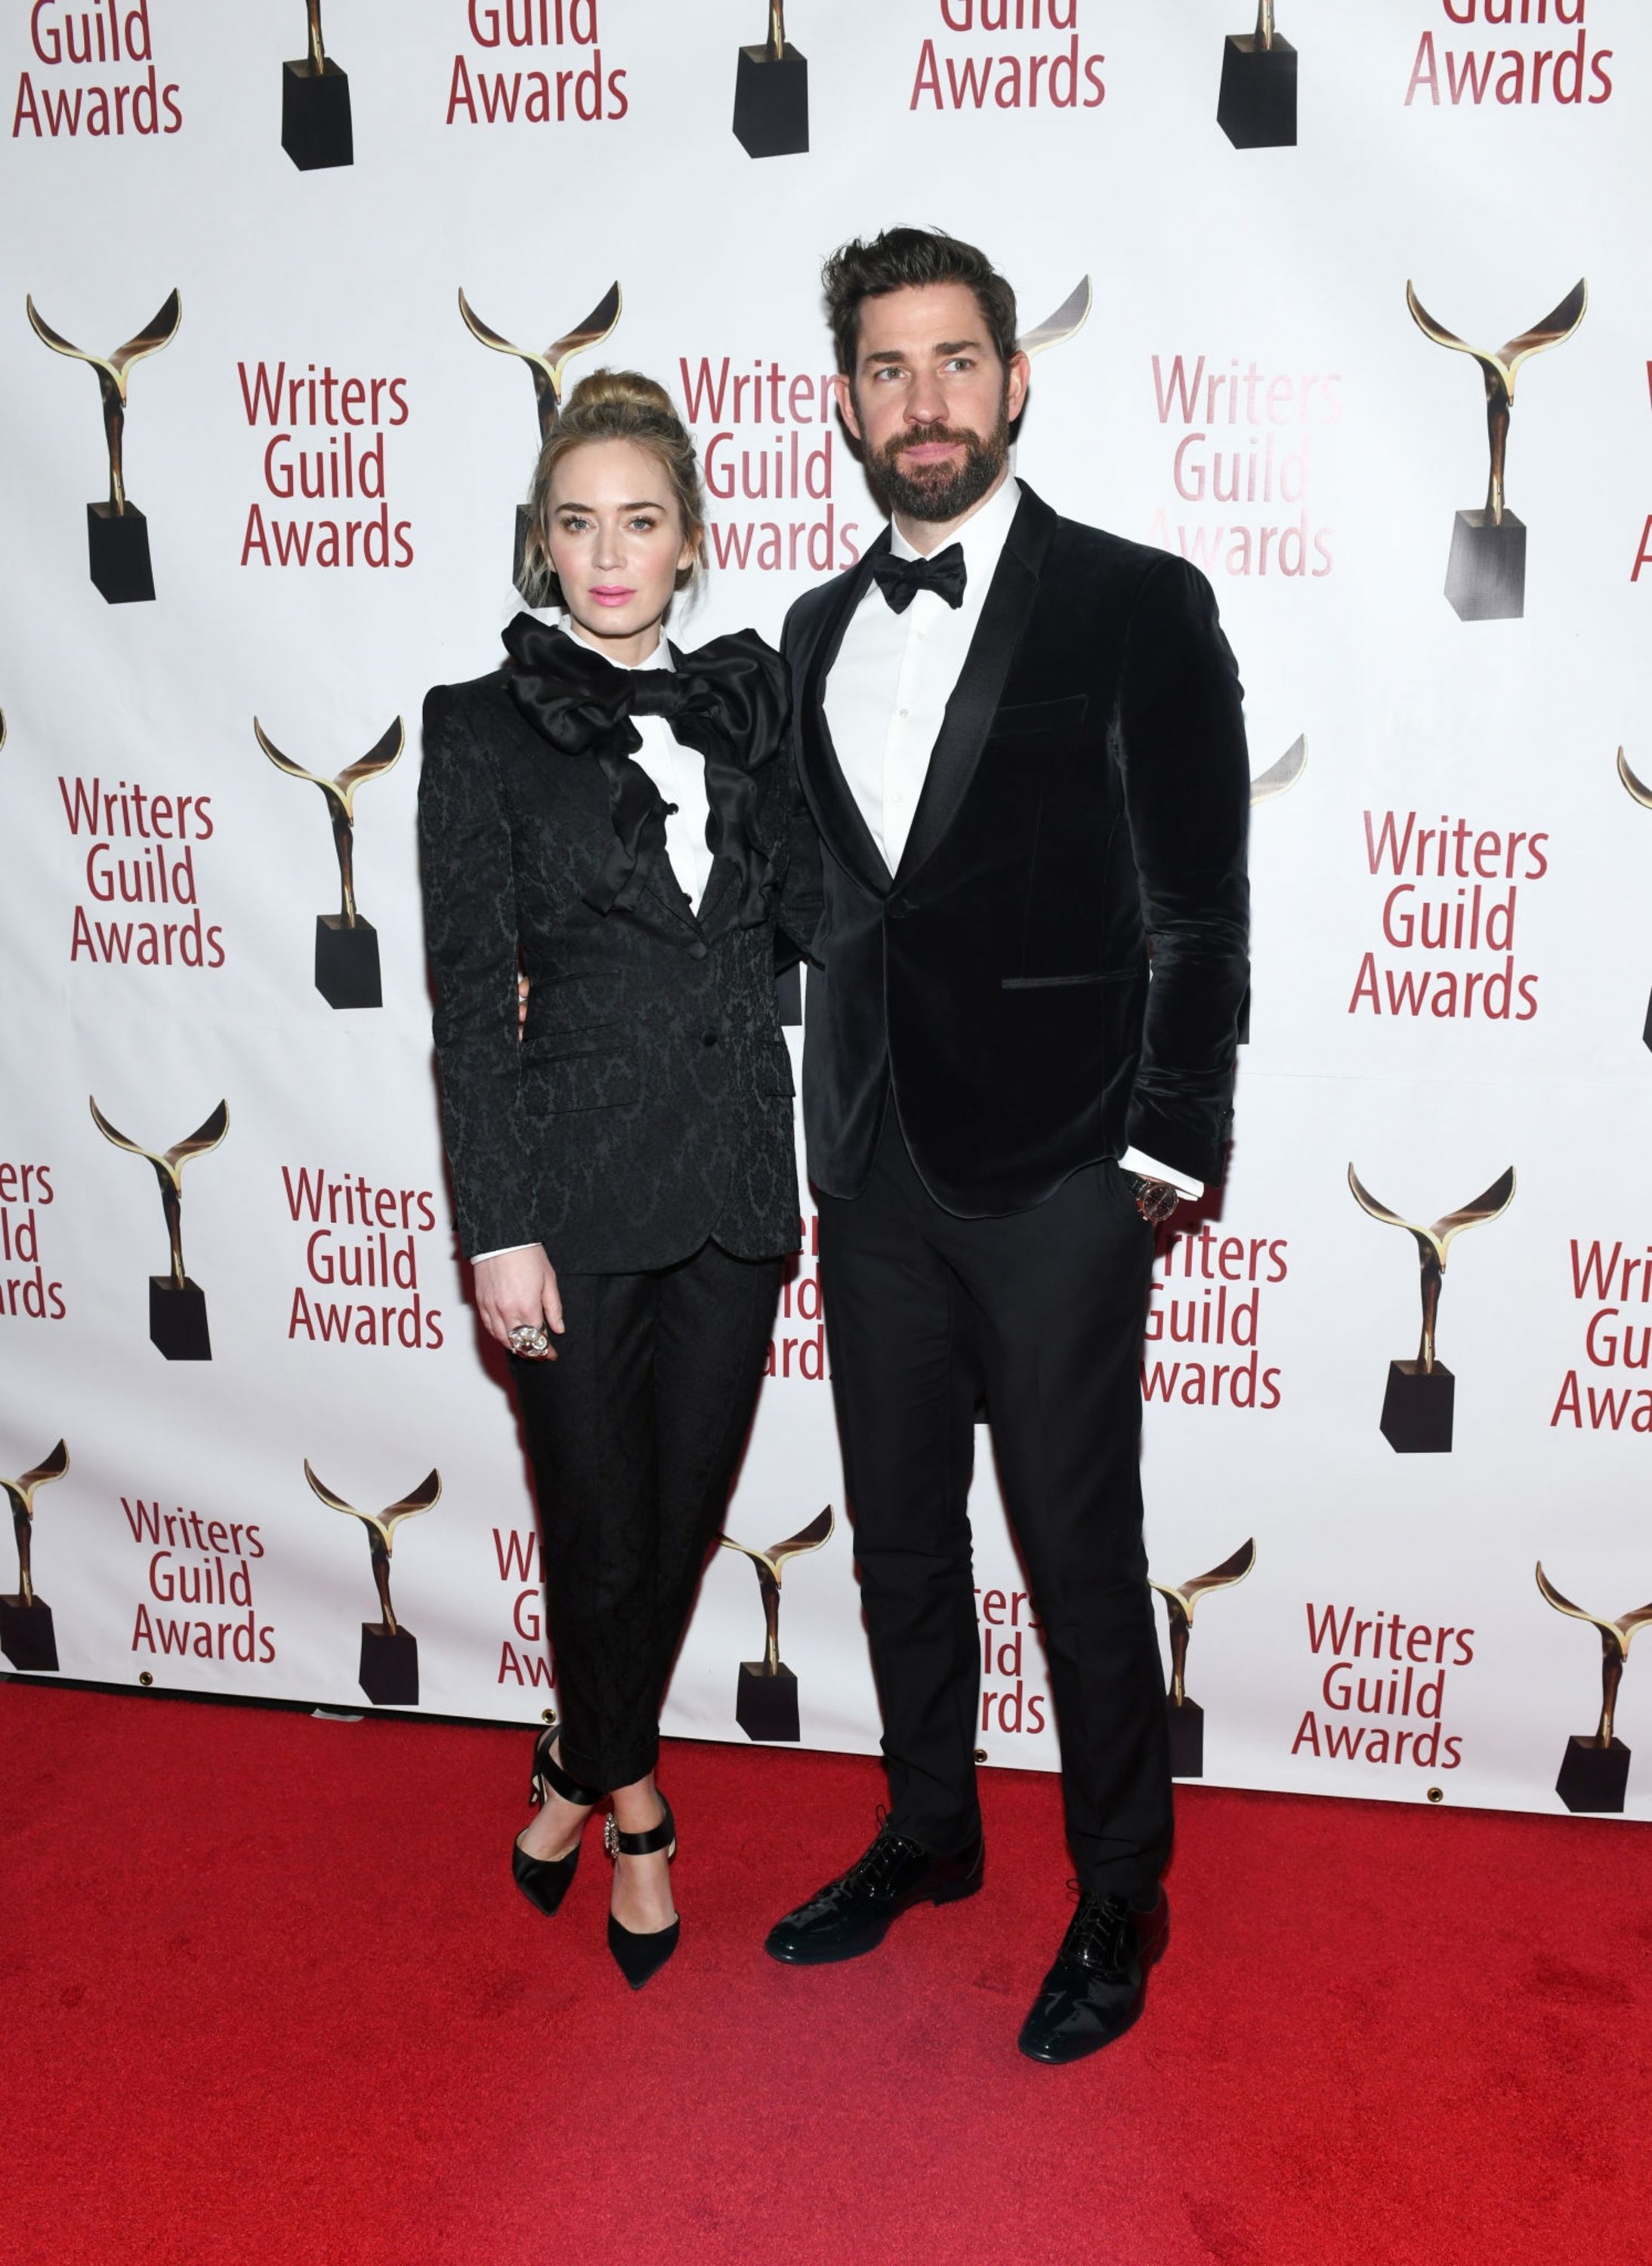 2019-02-17-71st-Annual-Writers-Guild-Awards-040.jpg